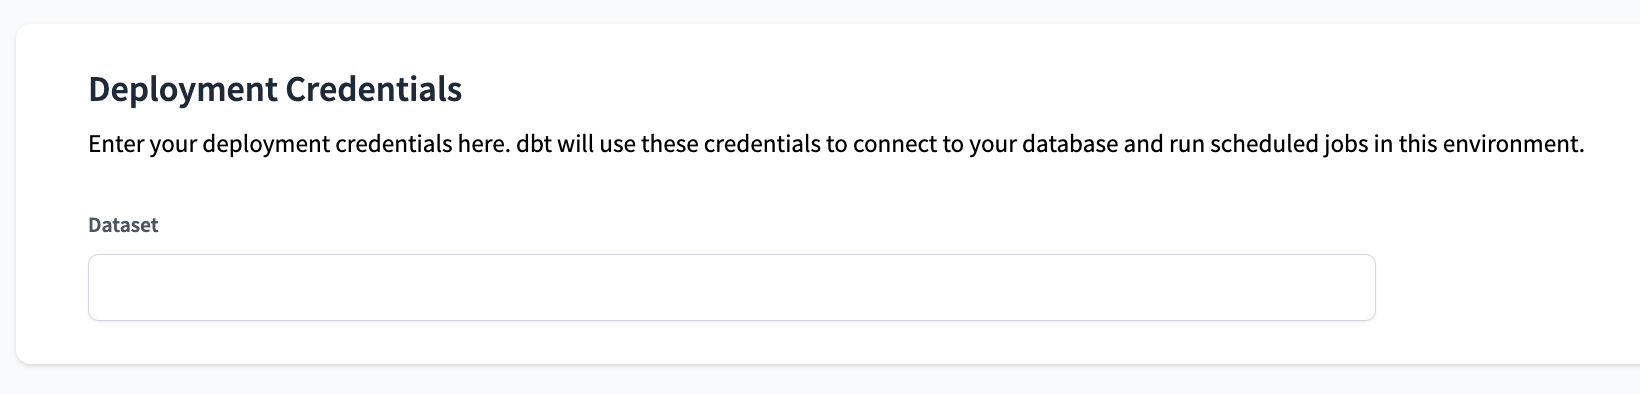 Bigquery Deployment Credentials Settings